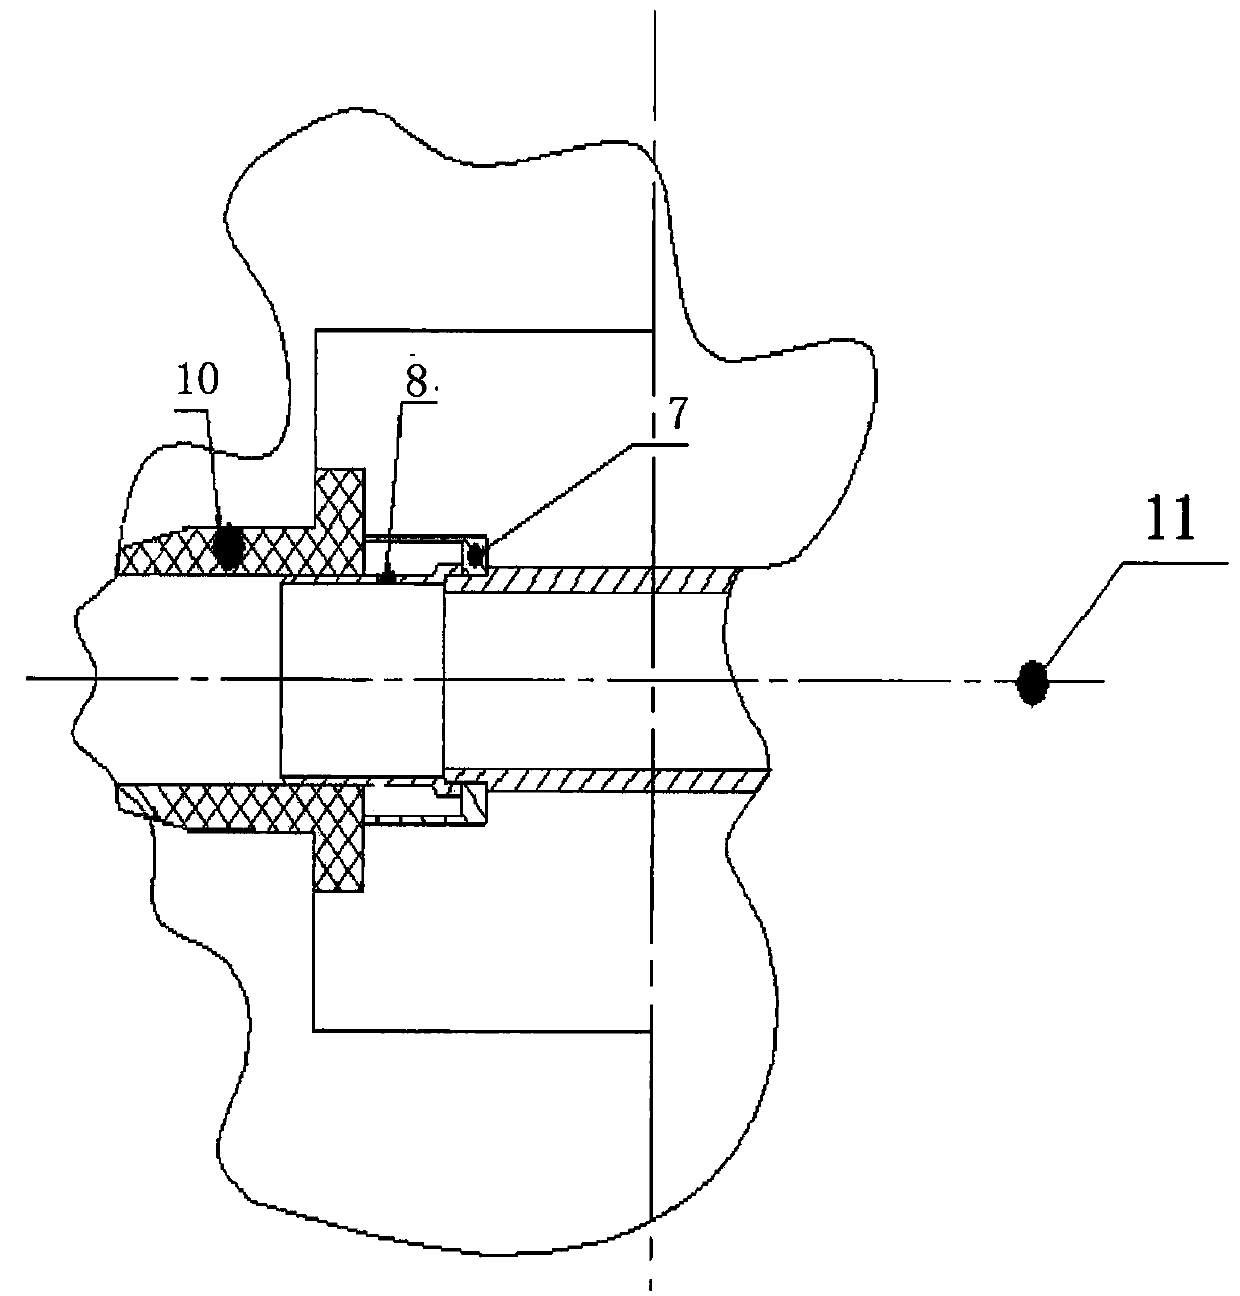 A method for splitting the deep hole in the slender inner cavity of an aero-engine